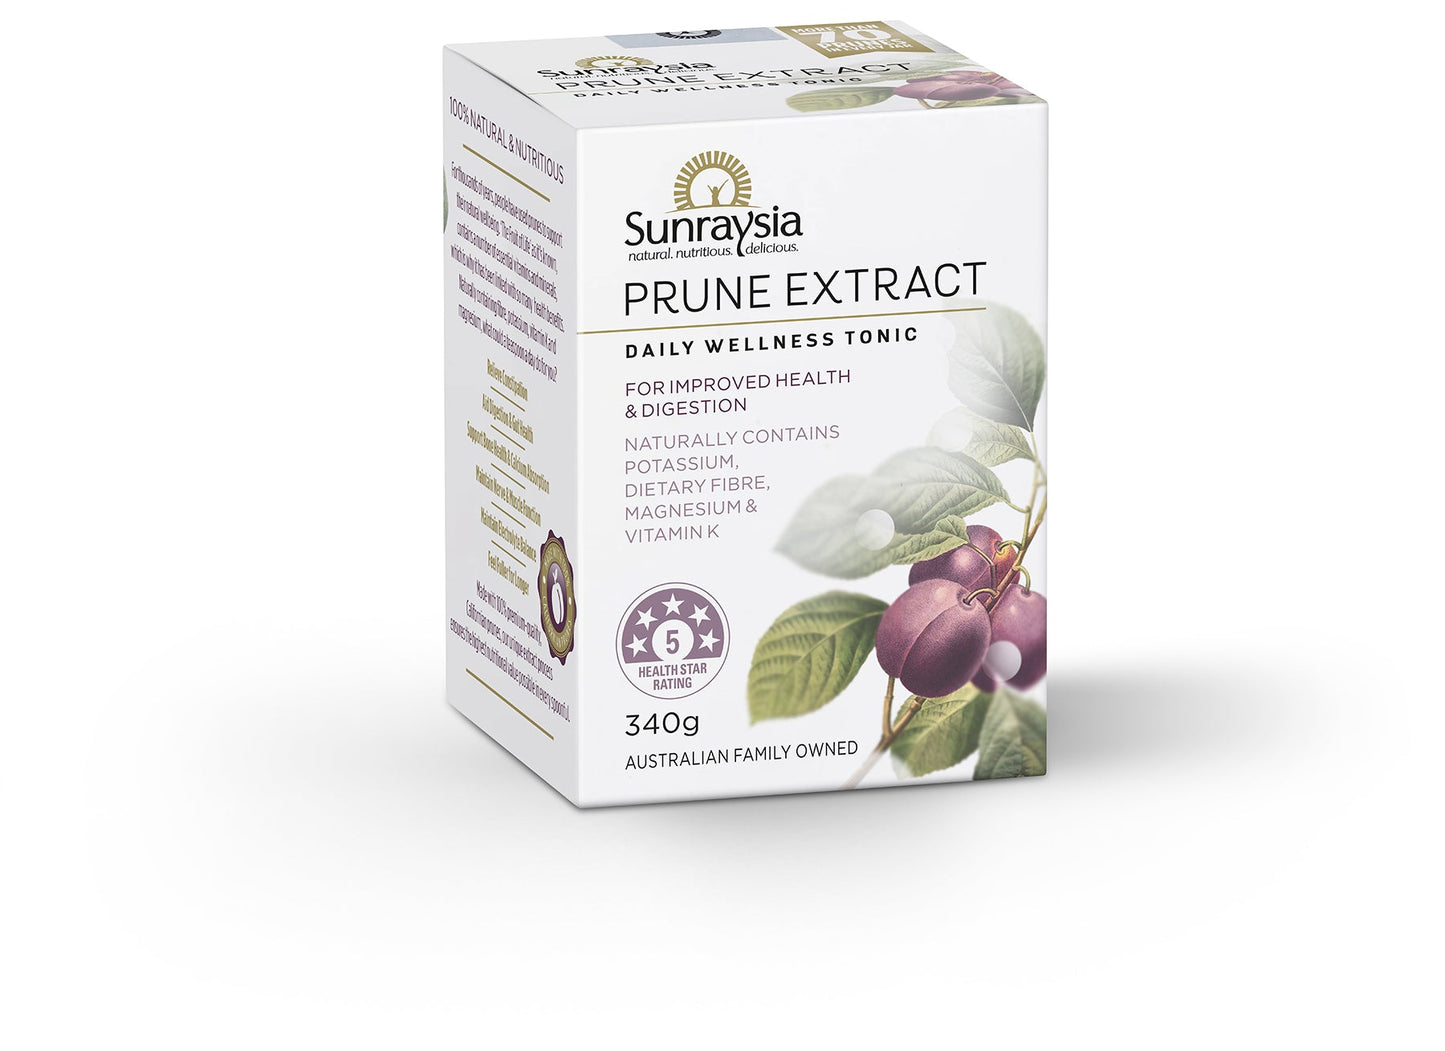 Sunraysia Prune Extract - Natural Constipation Relief 🌱